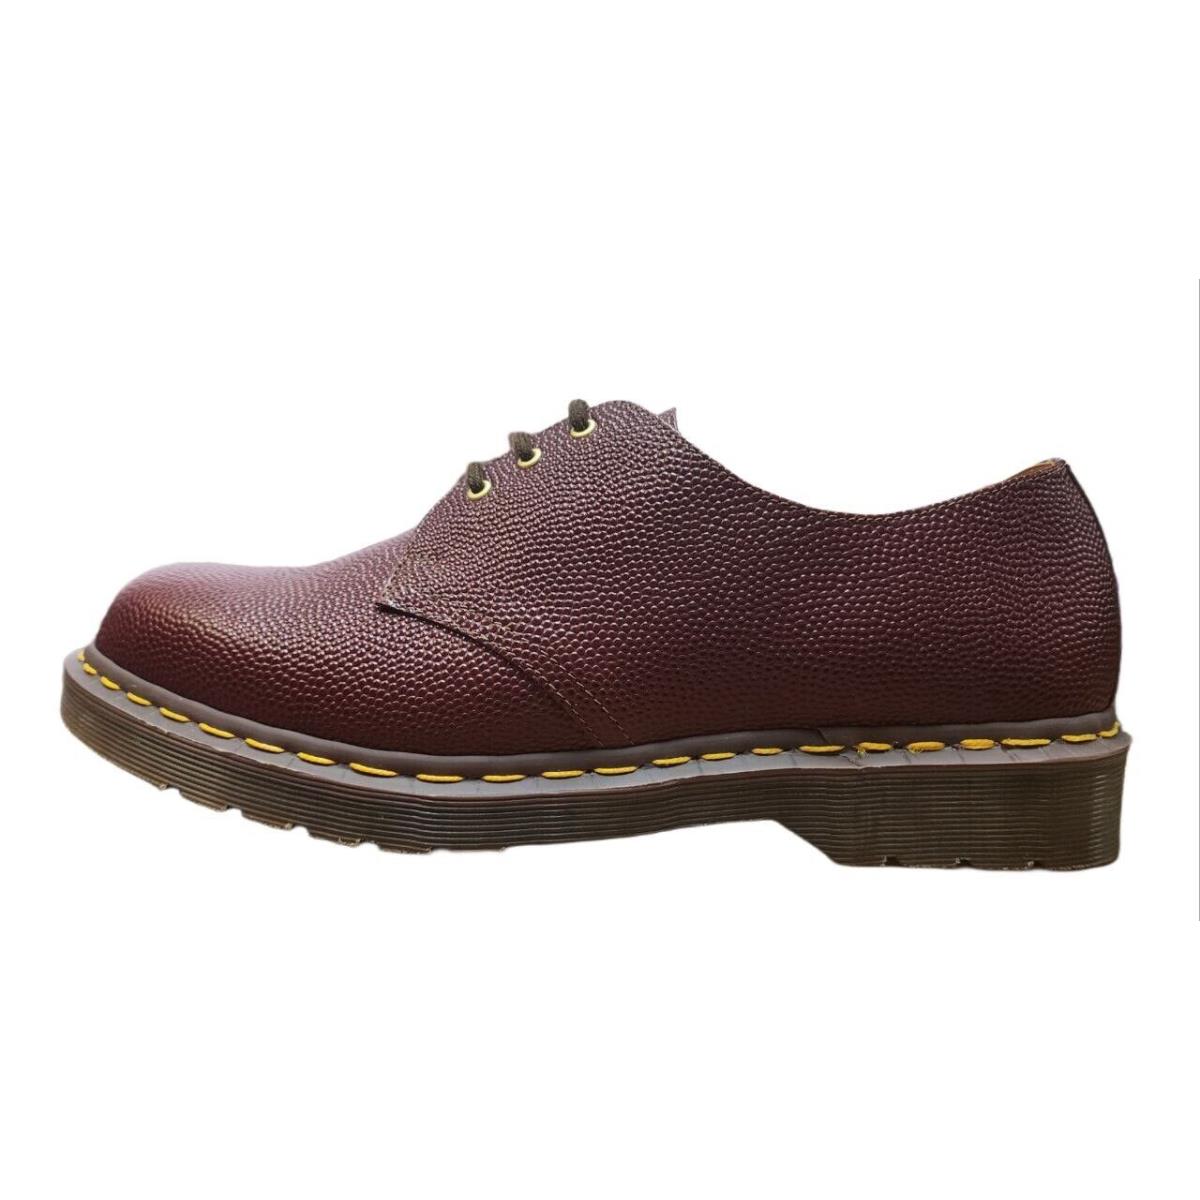 Dr. Martens Men`s Cherry Limited Edition 50th Anniversary Oxford Shoes US13